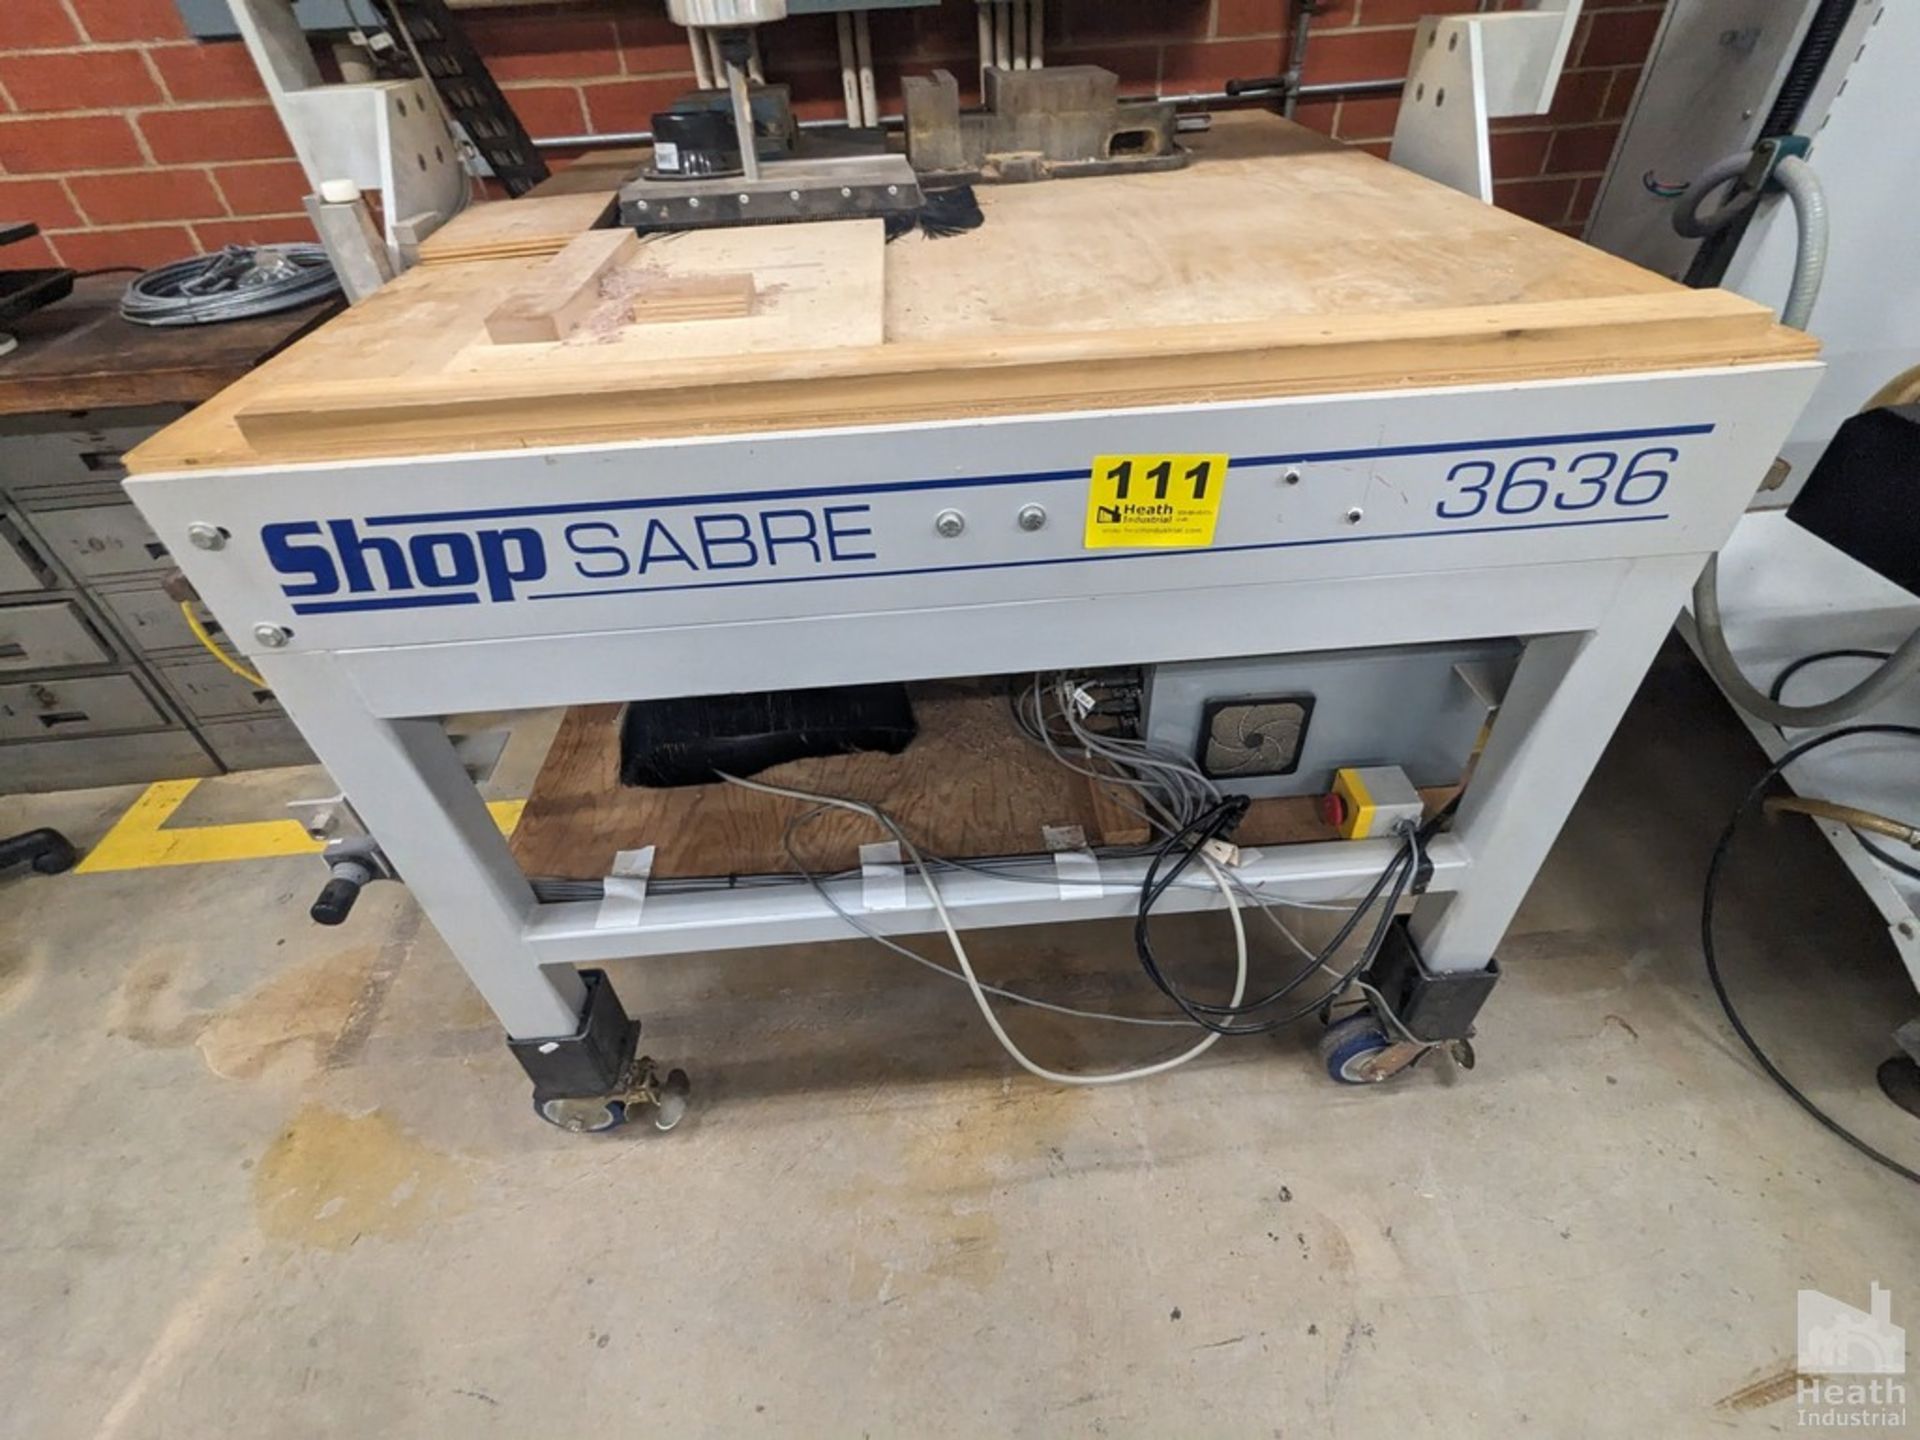 SABRE MODEL 3636 CNC WOOD ROUTER WITH PORTABLE TABLE Loading Fee :$100 - Image 5 of 6